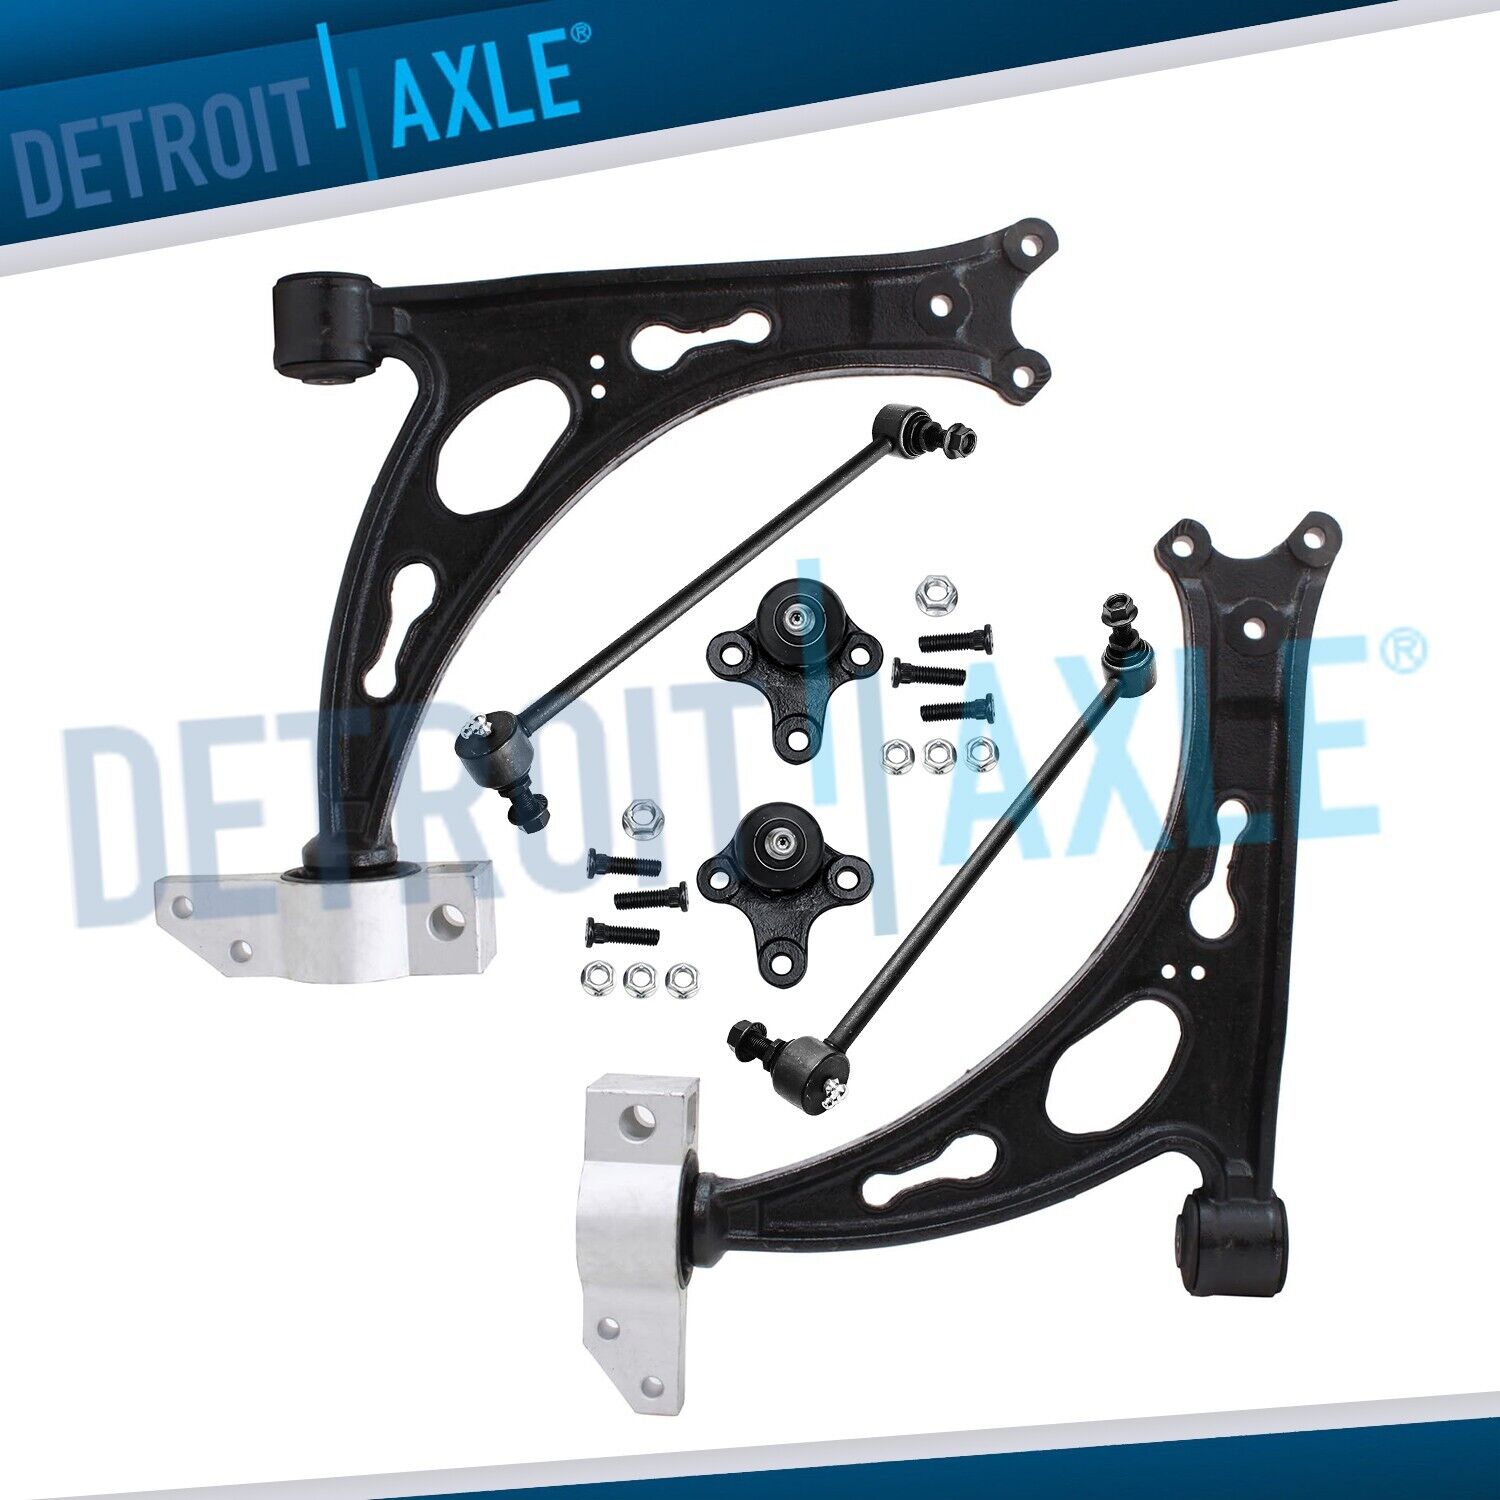 2New 6pc Complete Front Control Arm + Suspension Kit for Audi A3 2006-2009